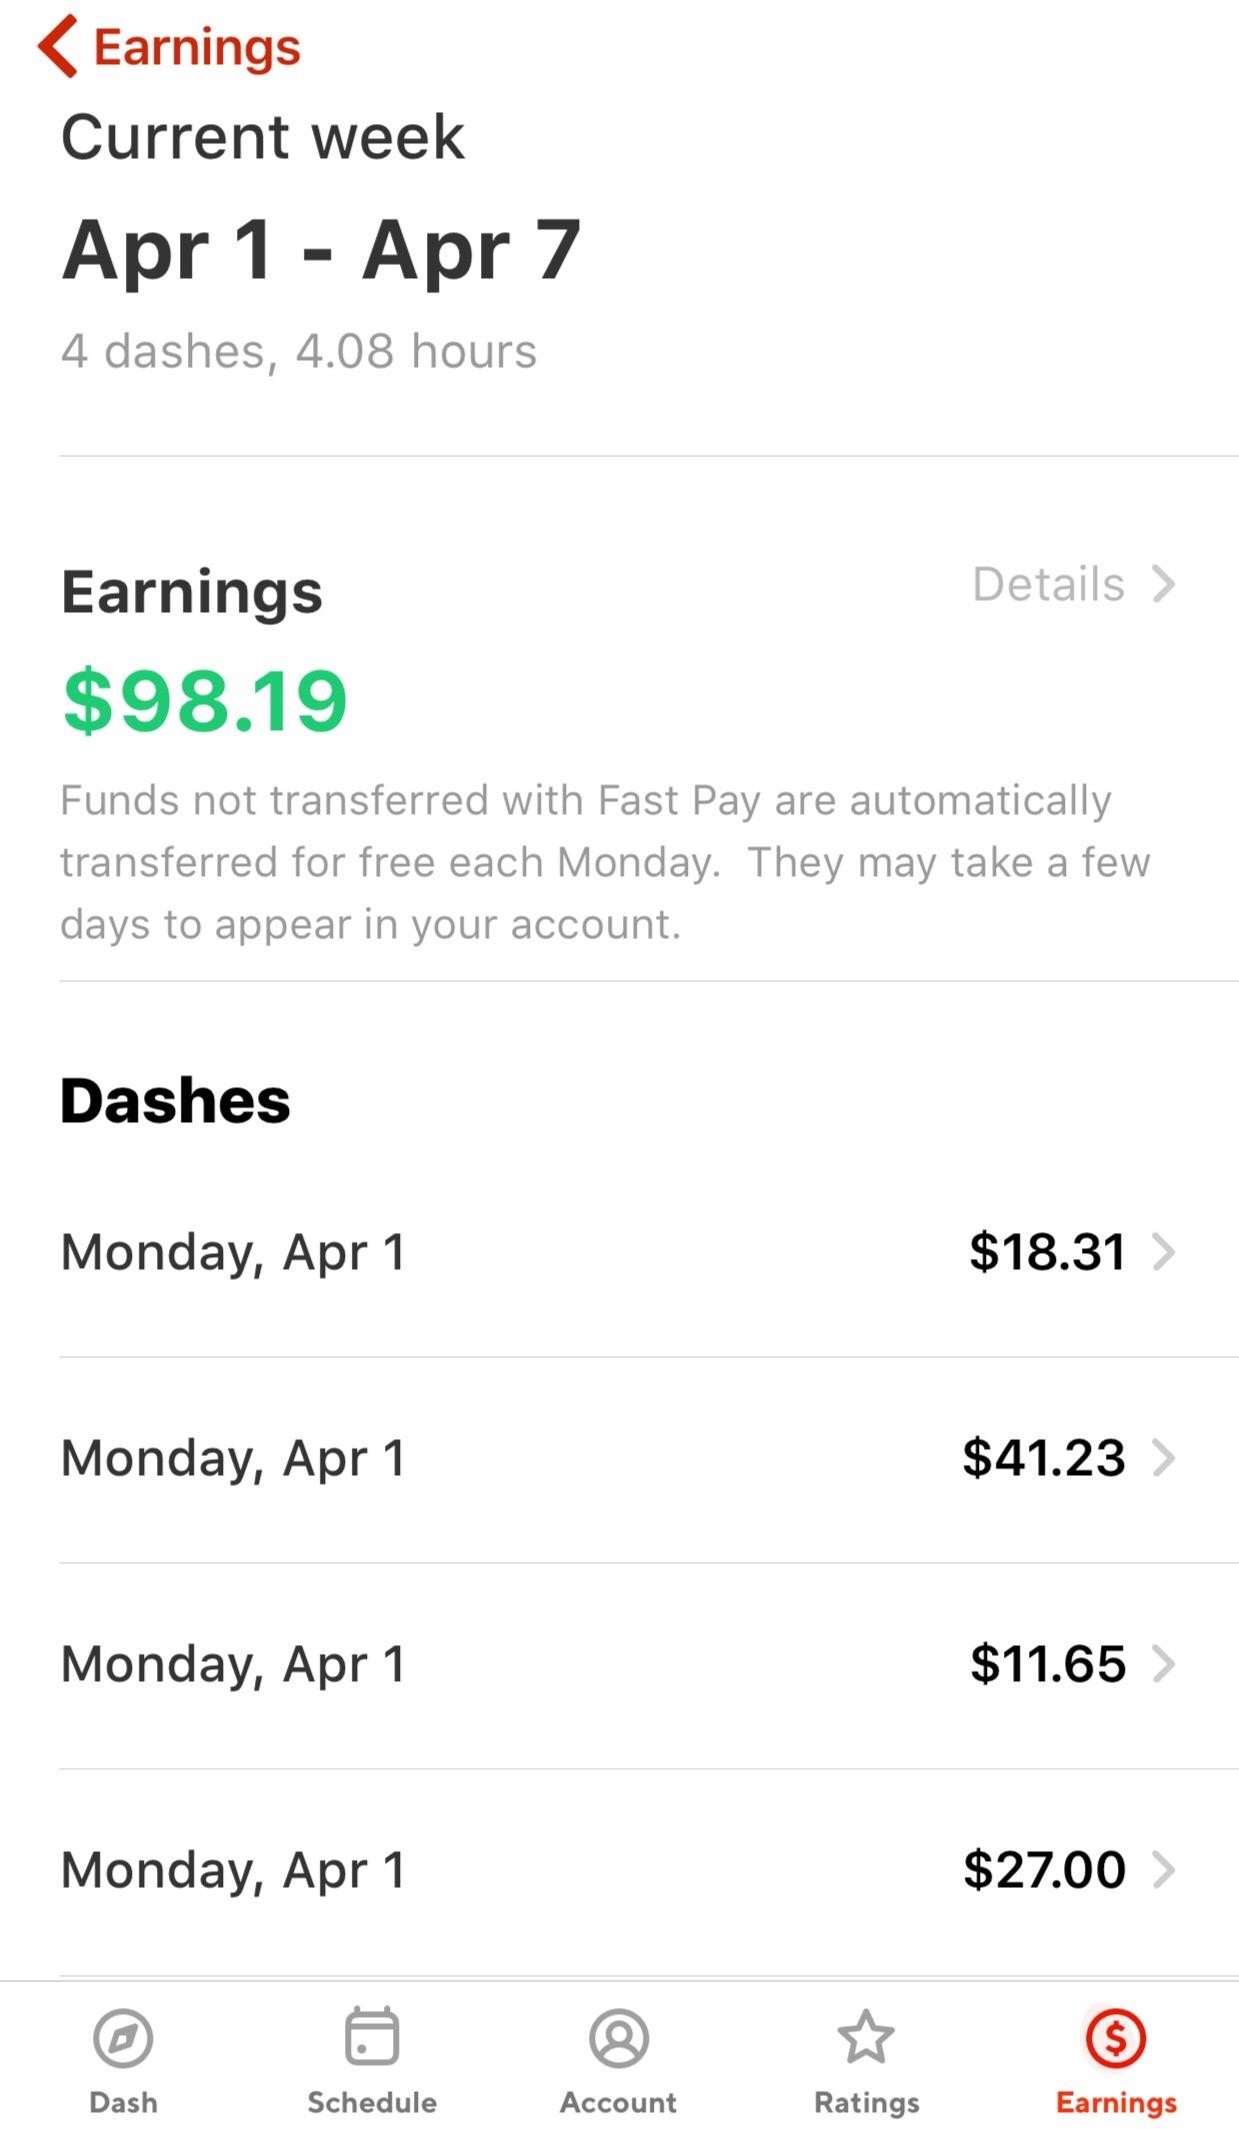 How Much Can You Make With DoorDash In 3 Hours?